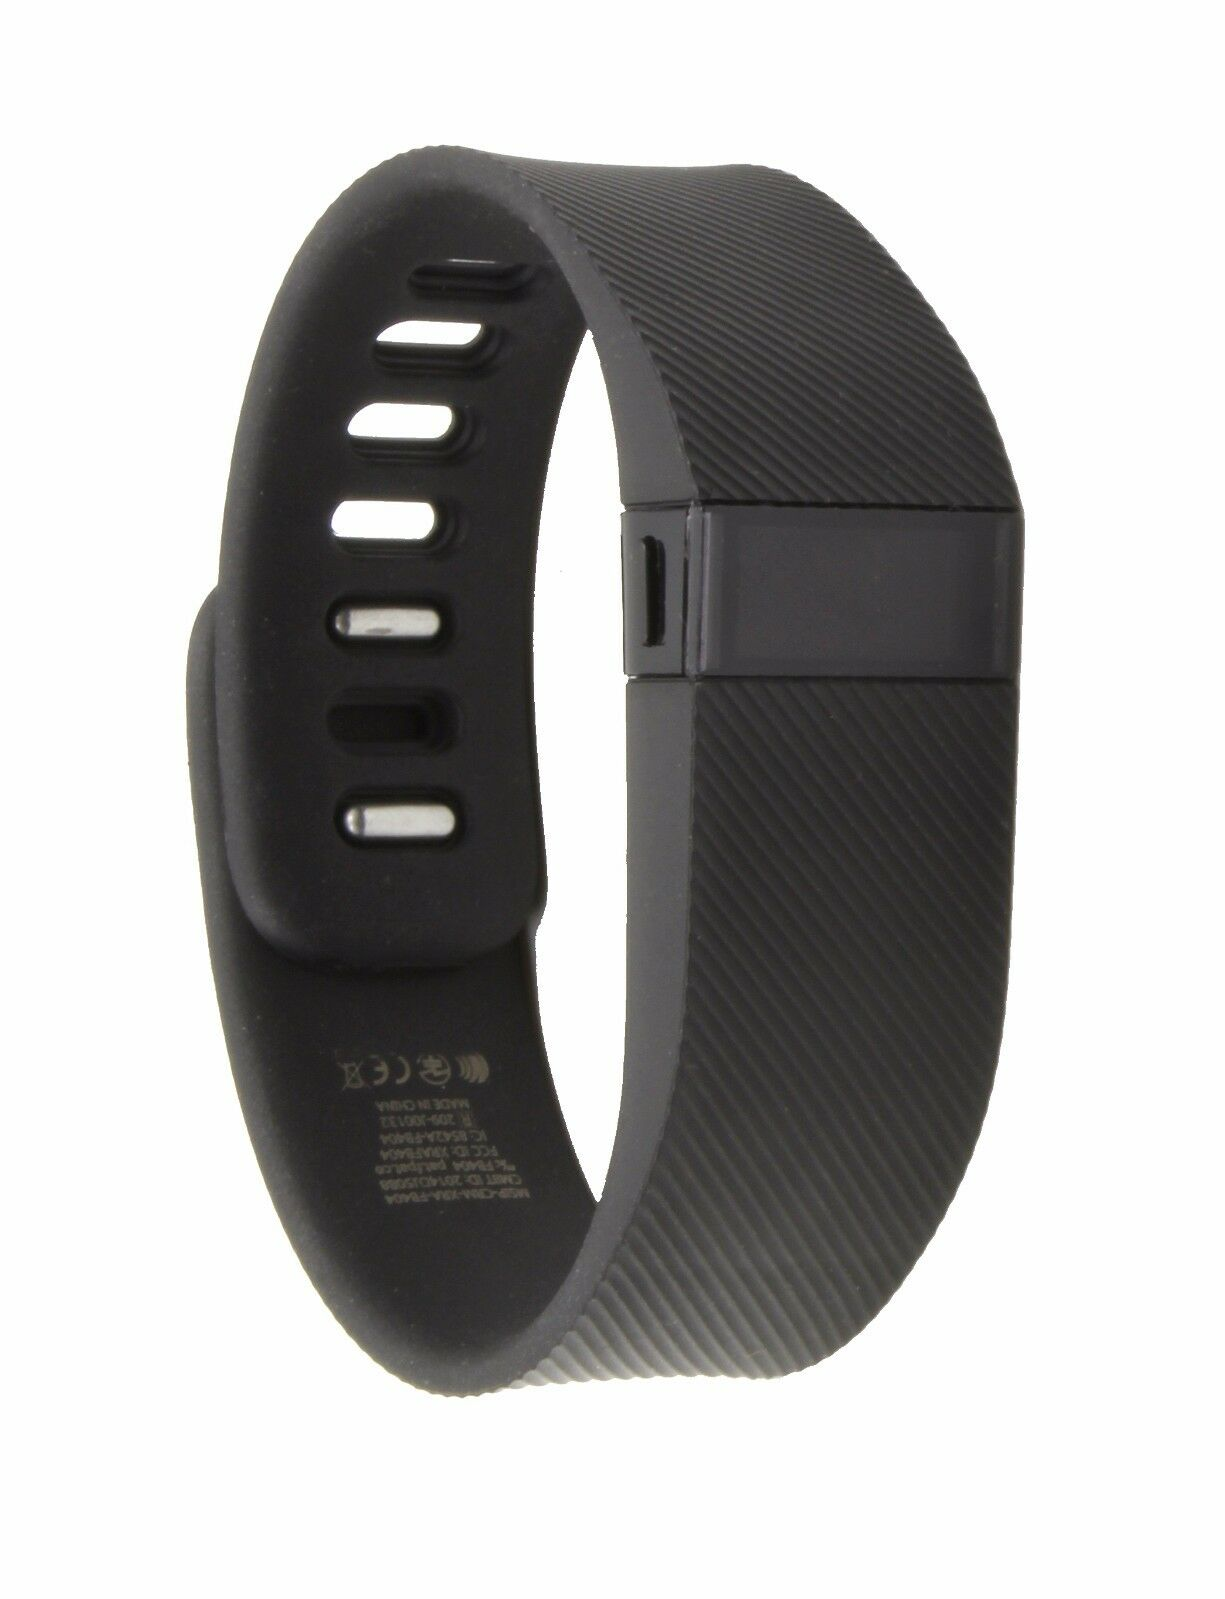 fitbit charge 2 kmart